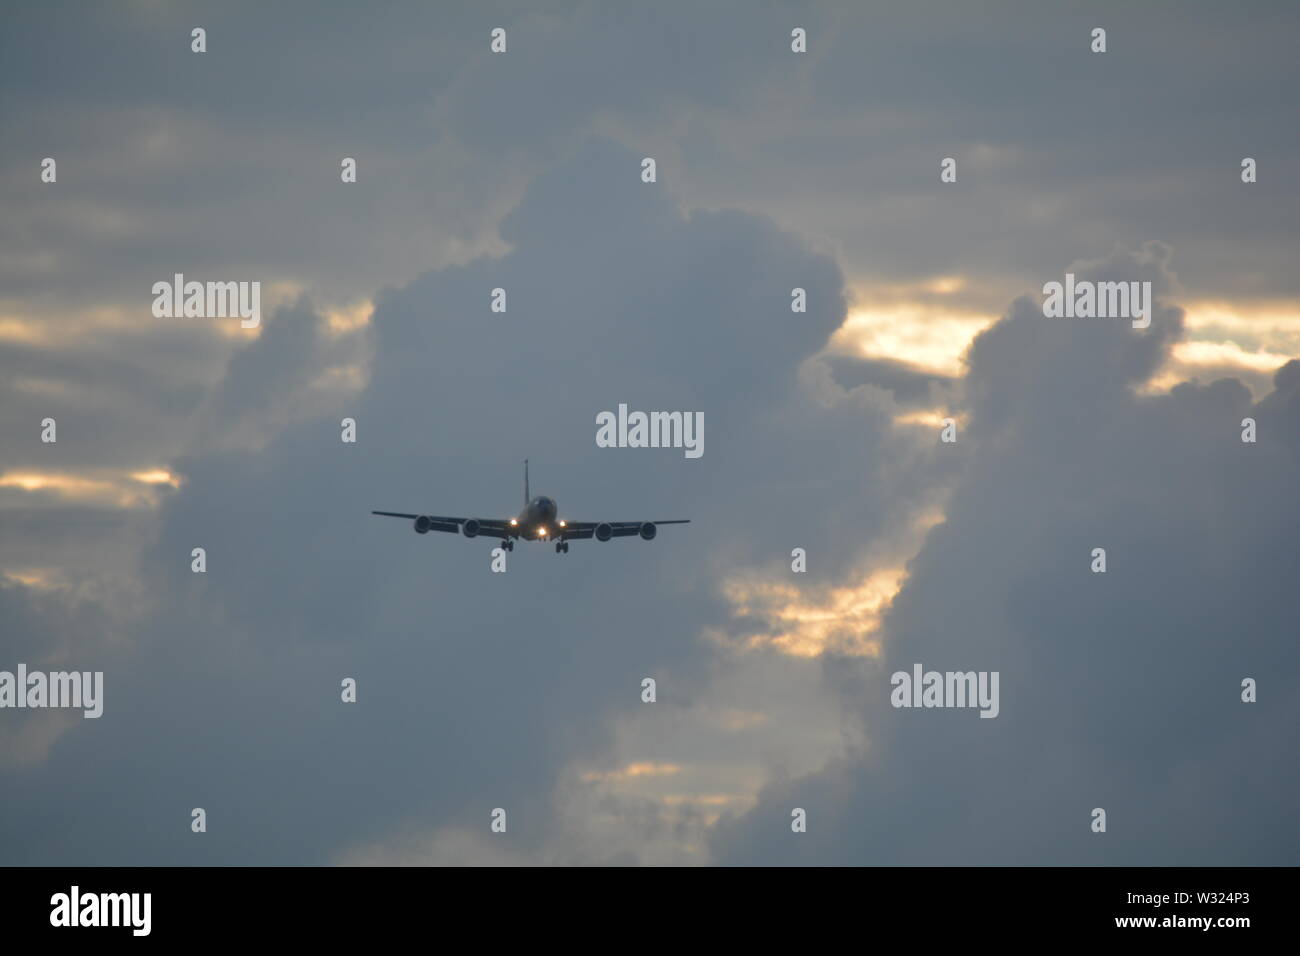 KC 135 aircraft on landing approach against a pastel coloured evening cloud bank Stock Photo